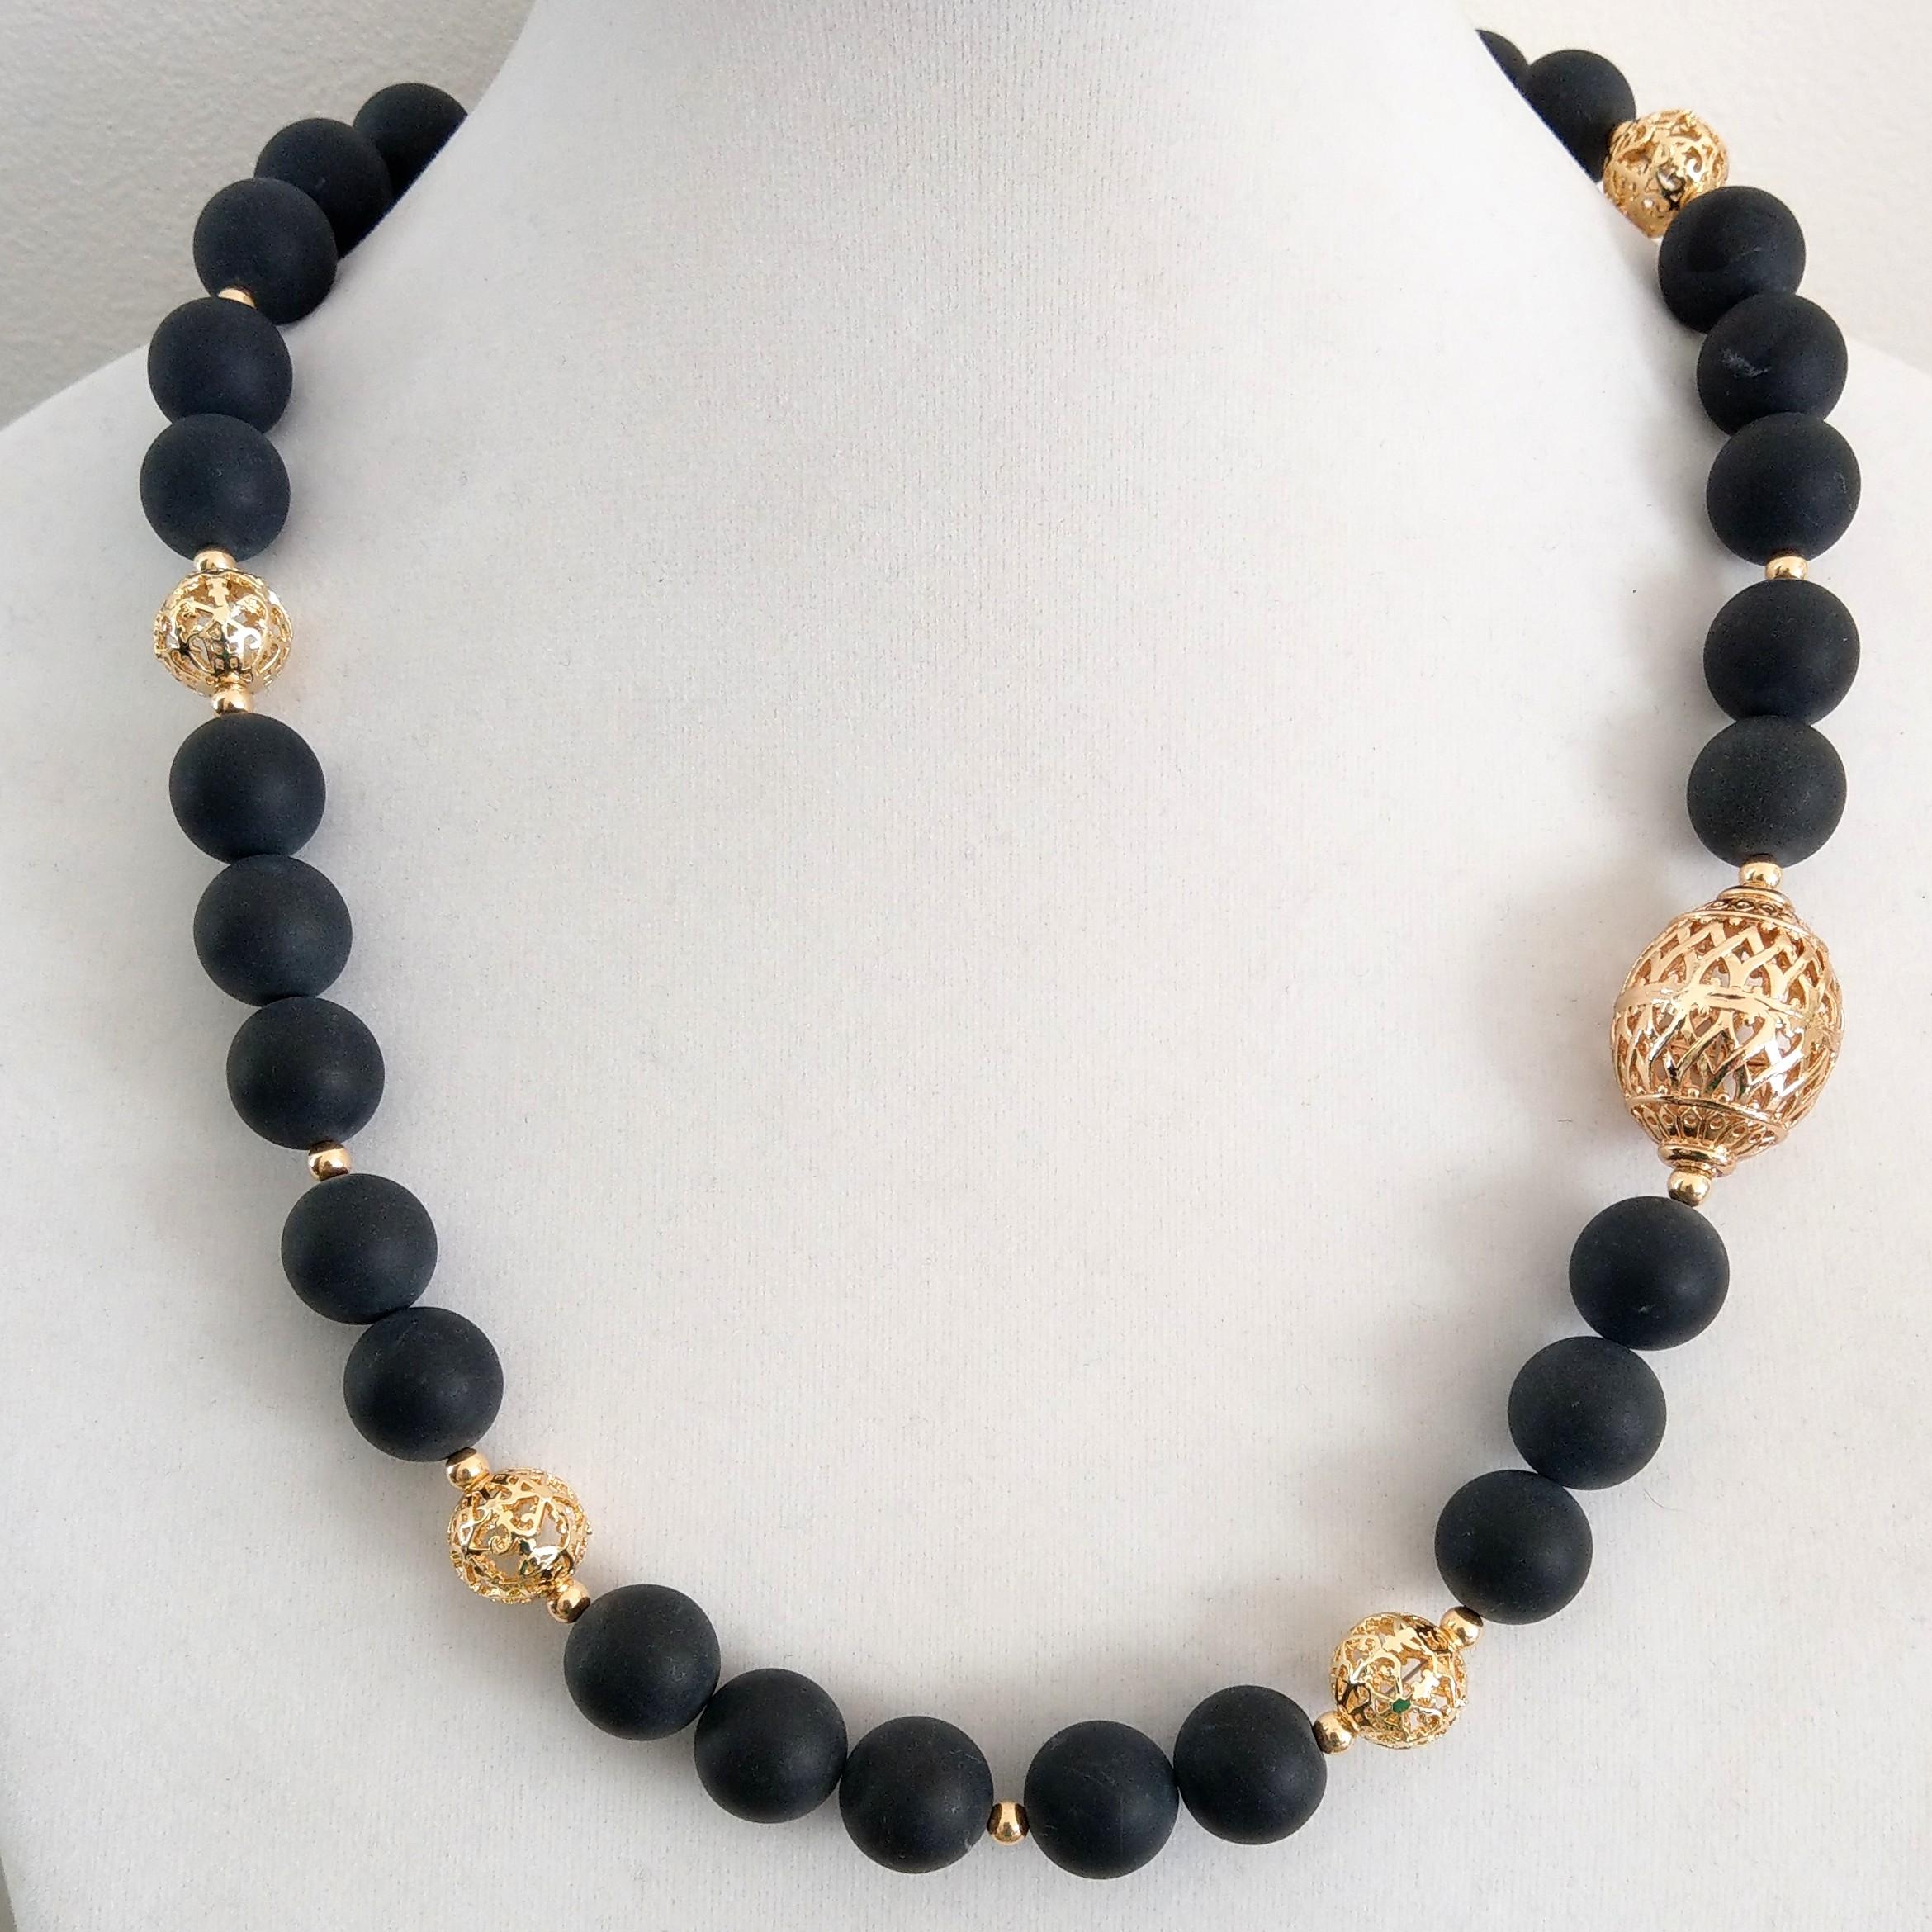 Asymmetrical necklace with 14mm matt black Onyx and a mix of filigree Gold filled beads 12mm and 19x28mm with a Gold plate sterling silver hook clasp.
Necklace length 22.4 or 57cm inches .
